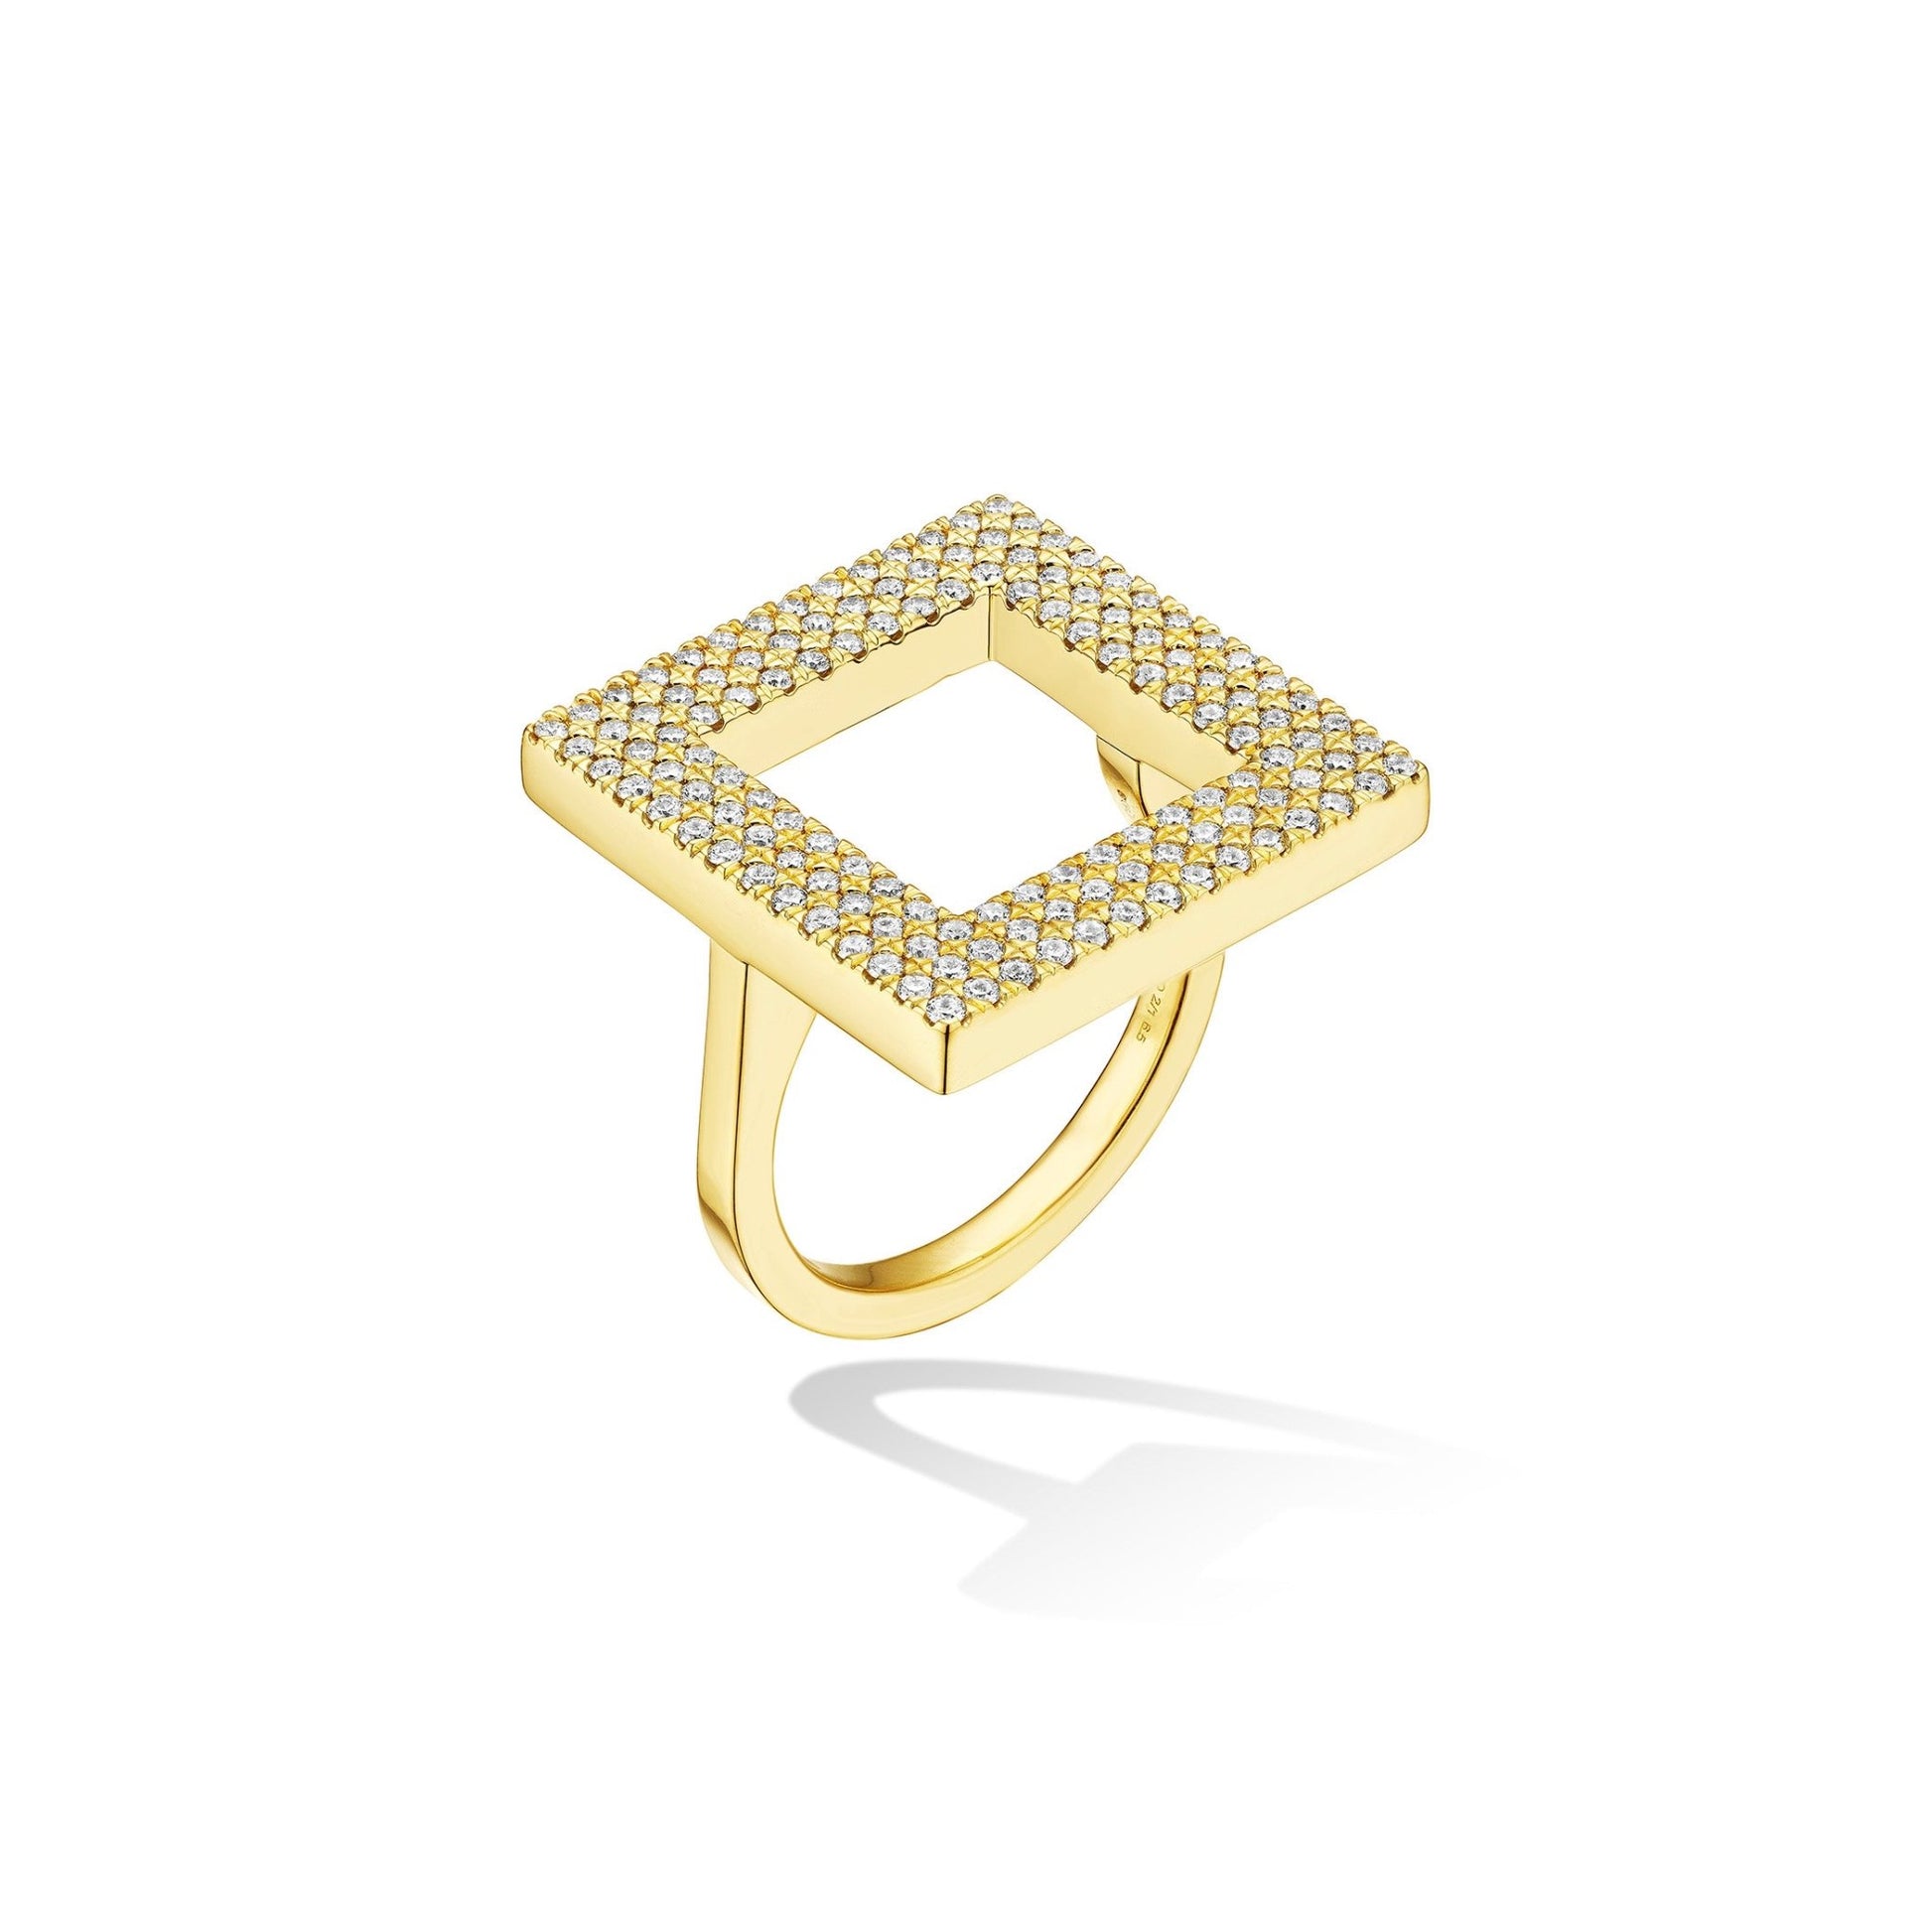 Yellow Gold Foundation Statement Ring with White Pavé Diamonds - CADAR